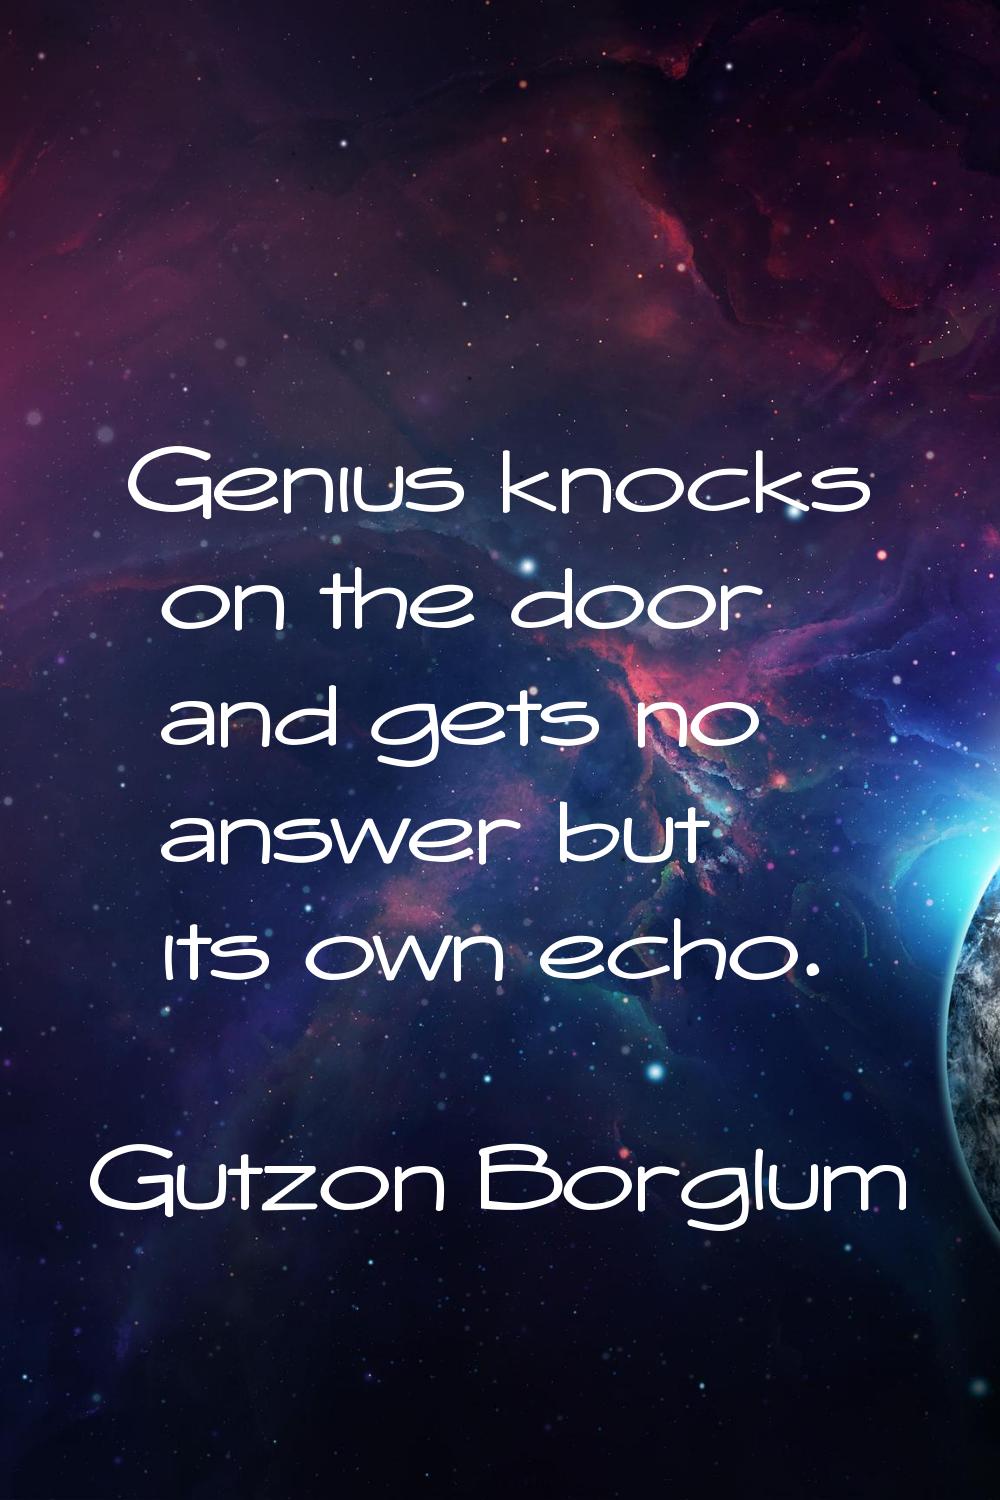 Genius knocks on the door and gets no answer but its own echo.